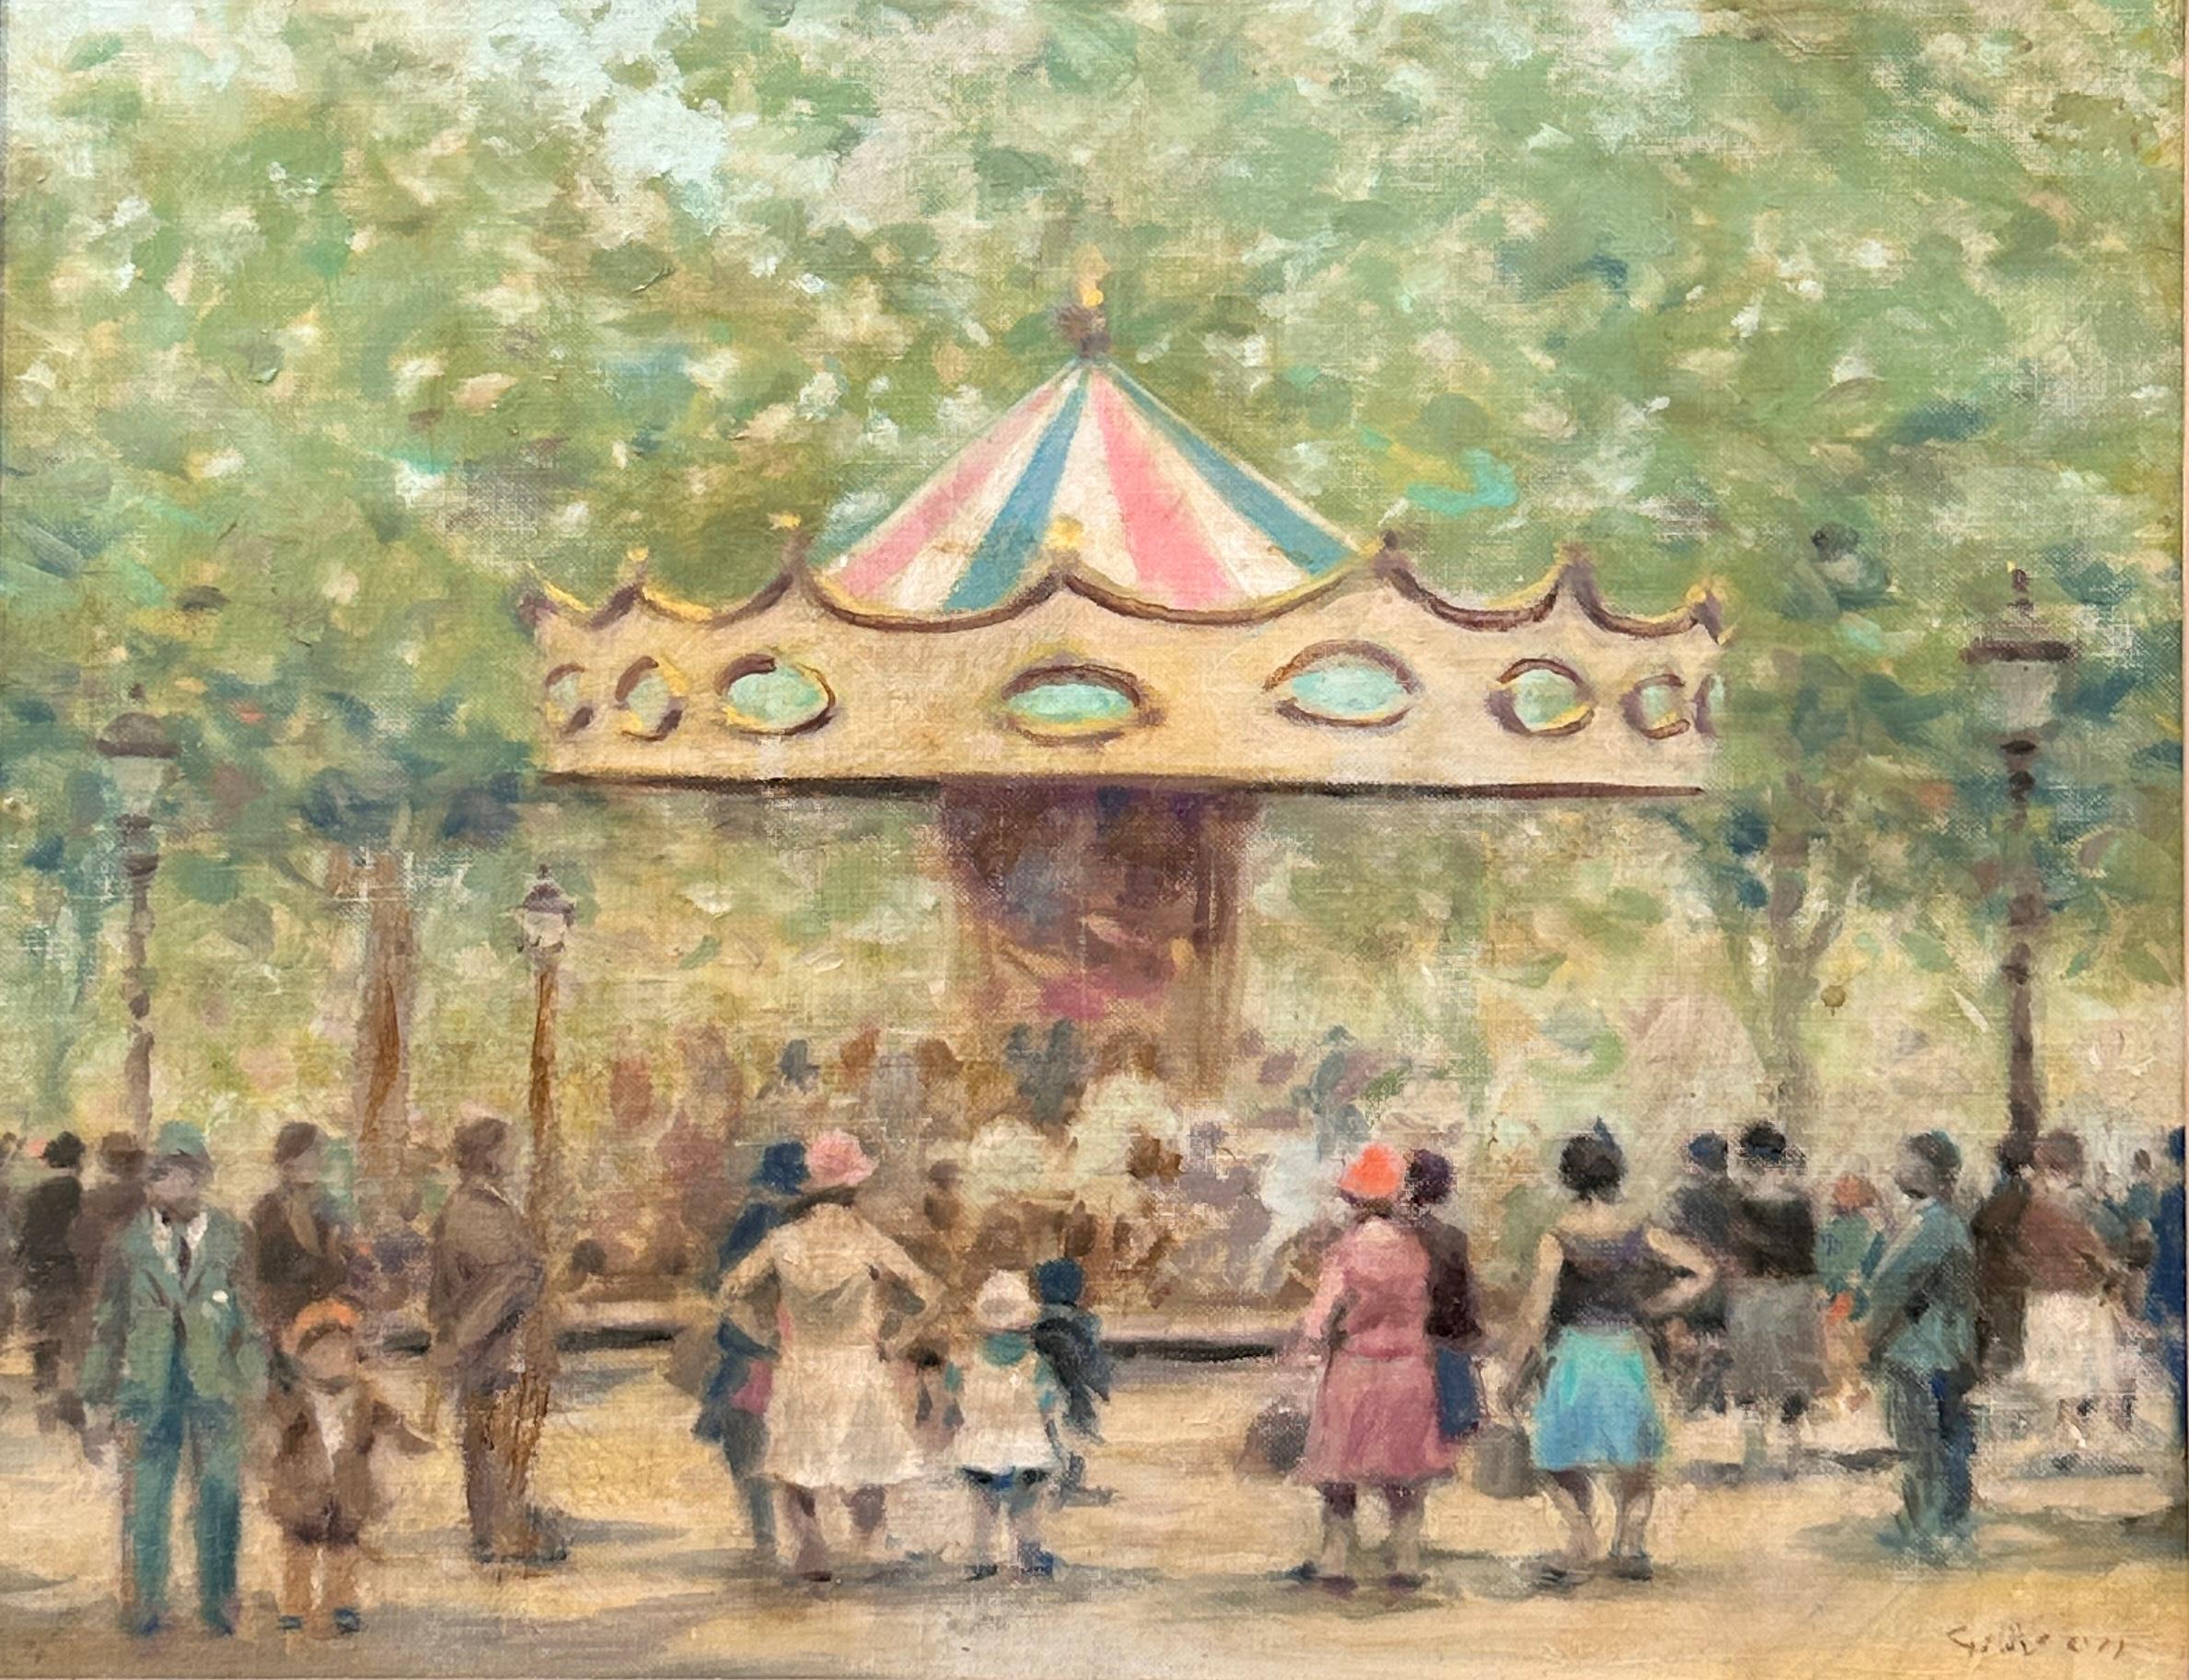 André Gisson Landscape Painting - "Carousel" - Carousel painting, Figures, American Impressionist in France